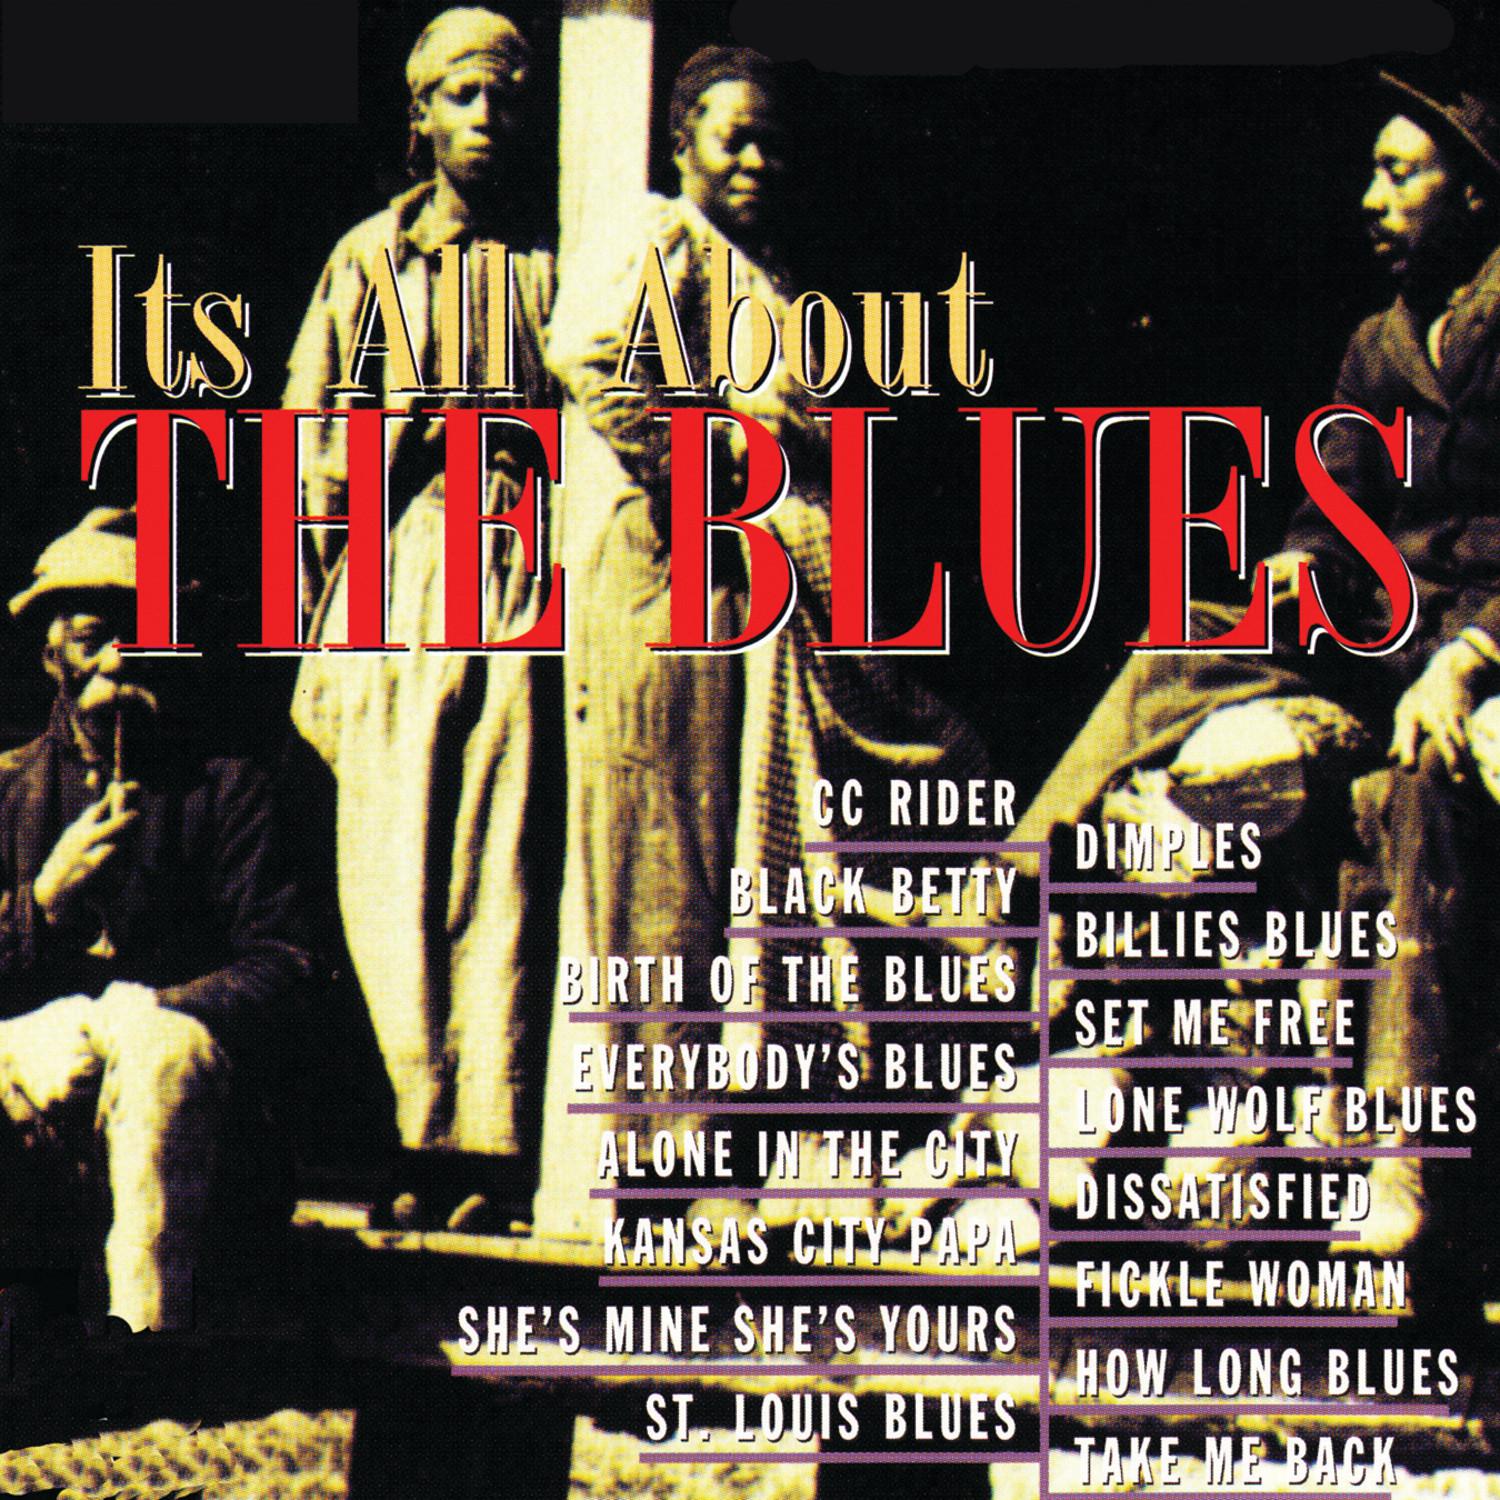 Birth Of The Blues